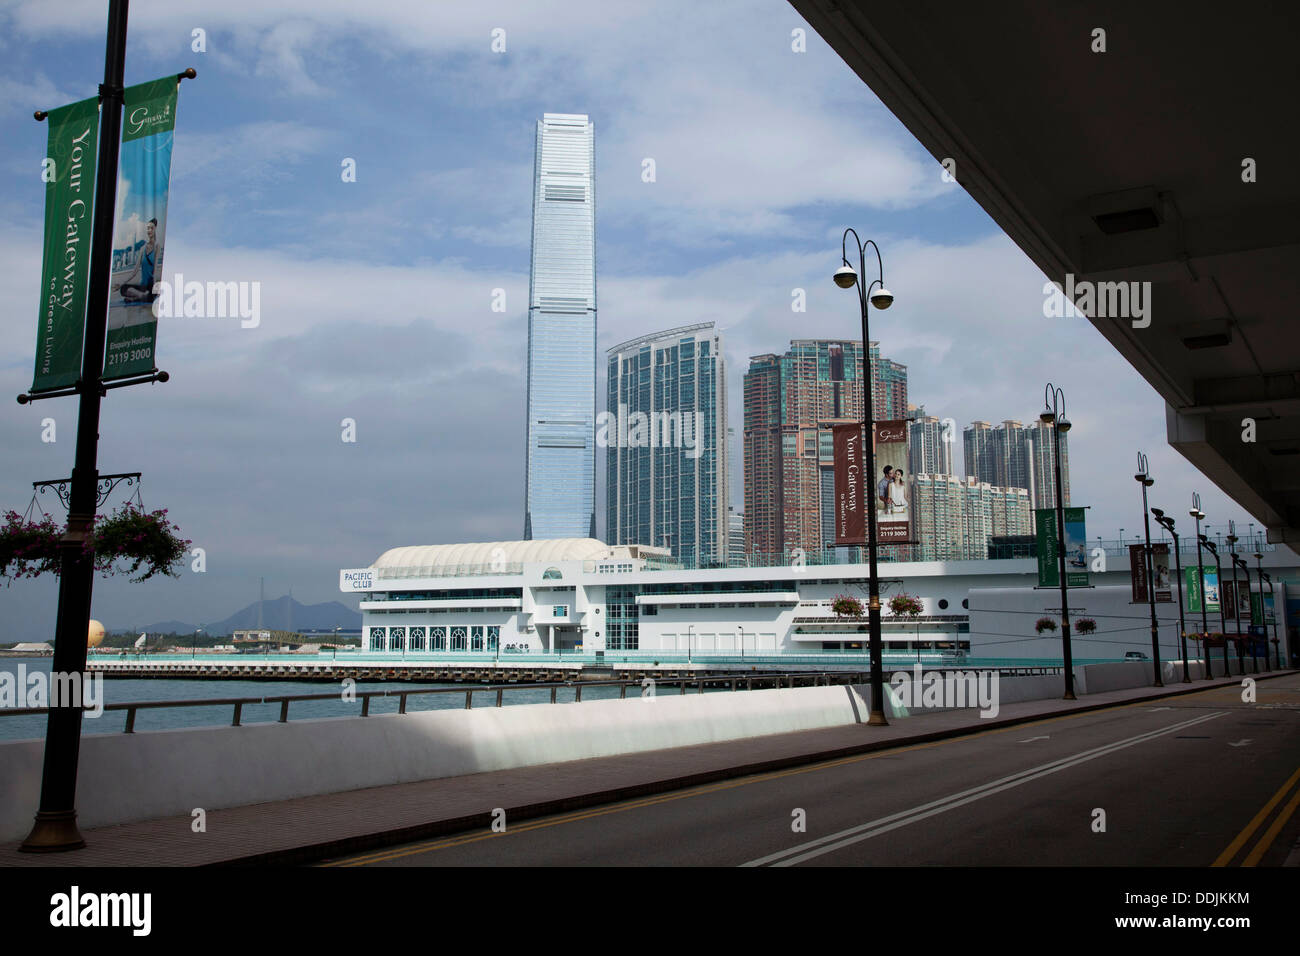 The 118-story International Commerce Center towers over West Kowloon, Hong Kong. Stock Photo